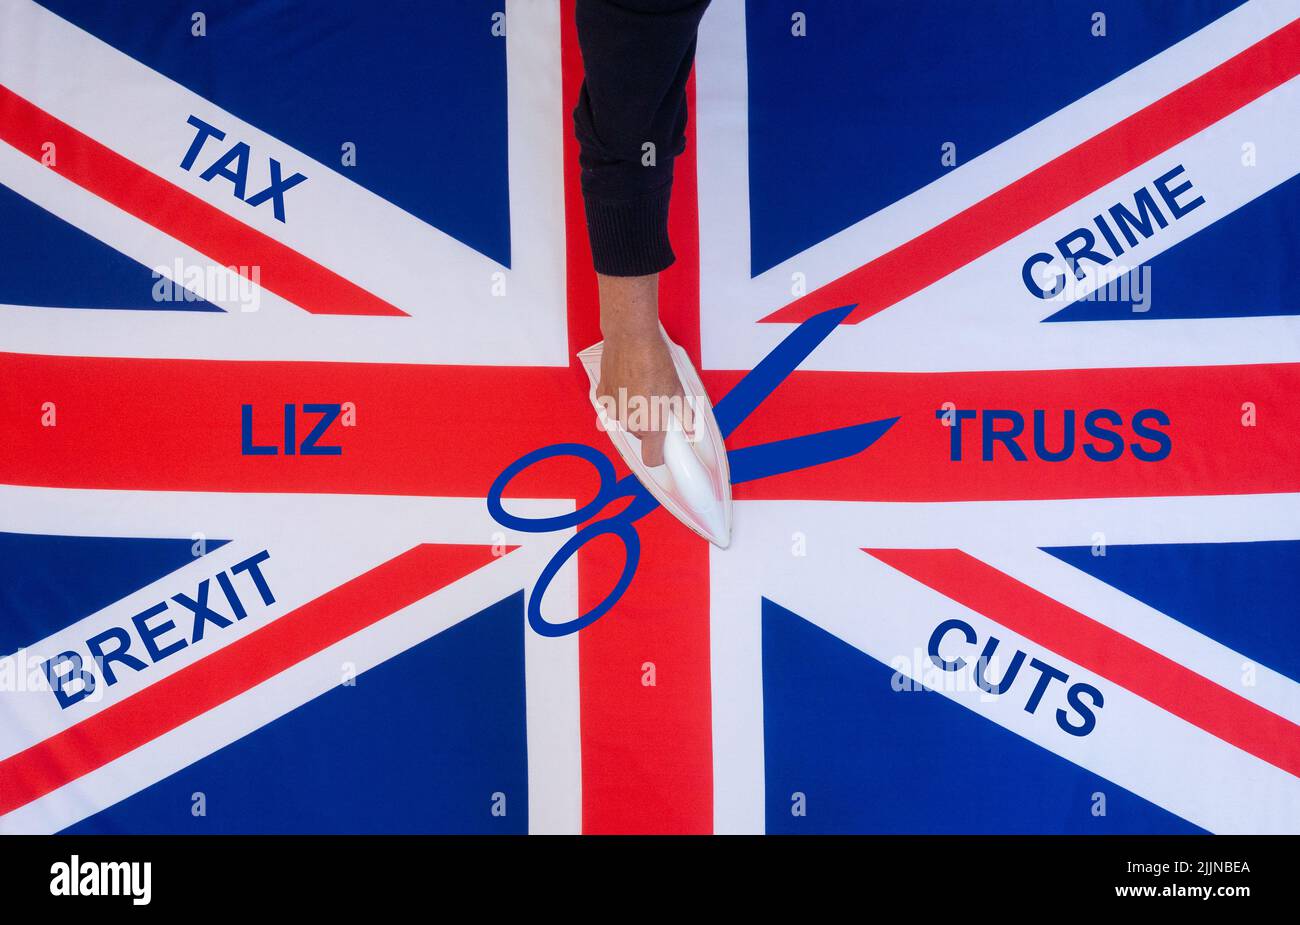 Liz Truss, tax cuts, Brexit, reducing crime... tory, Conservative party leadership campaign concept. Stock Photo